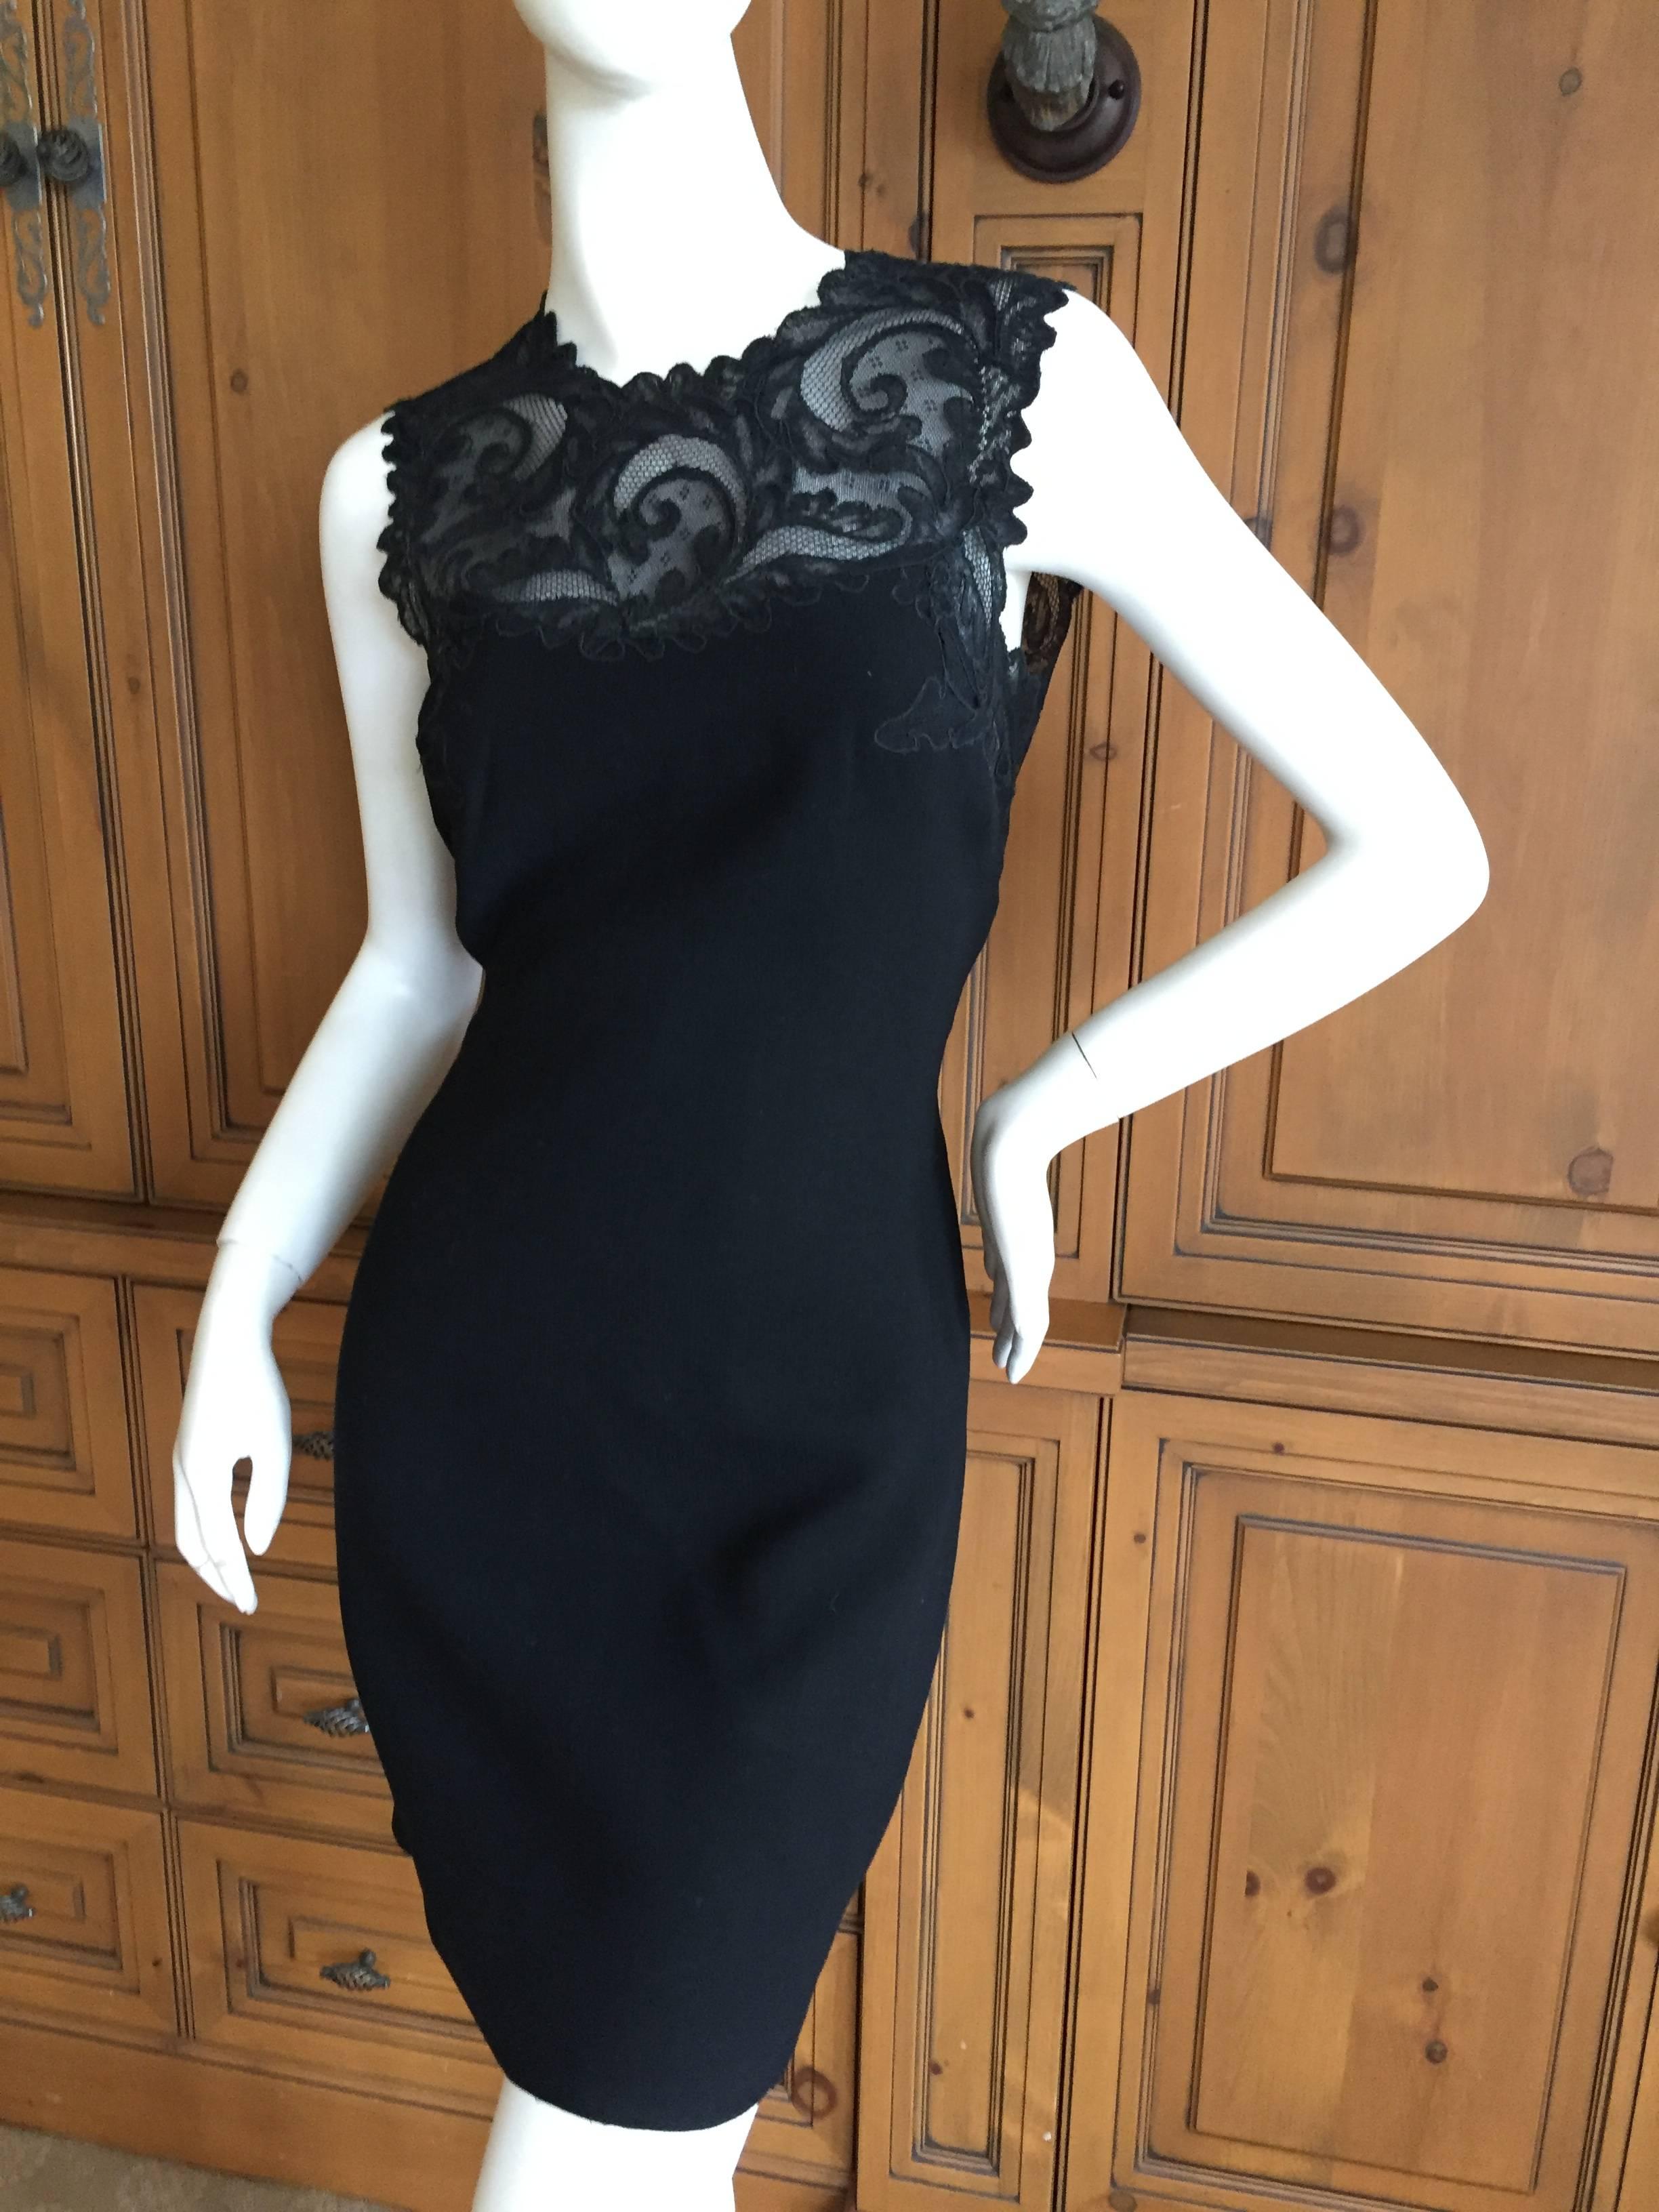 Gianni Versace Couture Lace Accented Little Black Dress In Excellent Condition For Sale In Cloverdale, CA